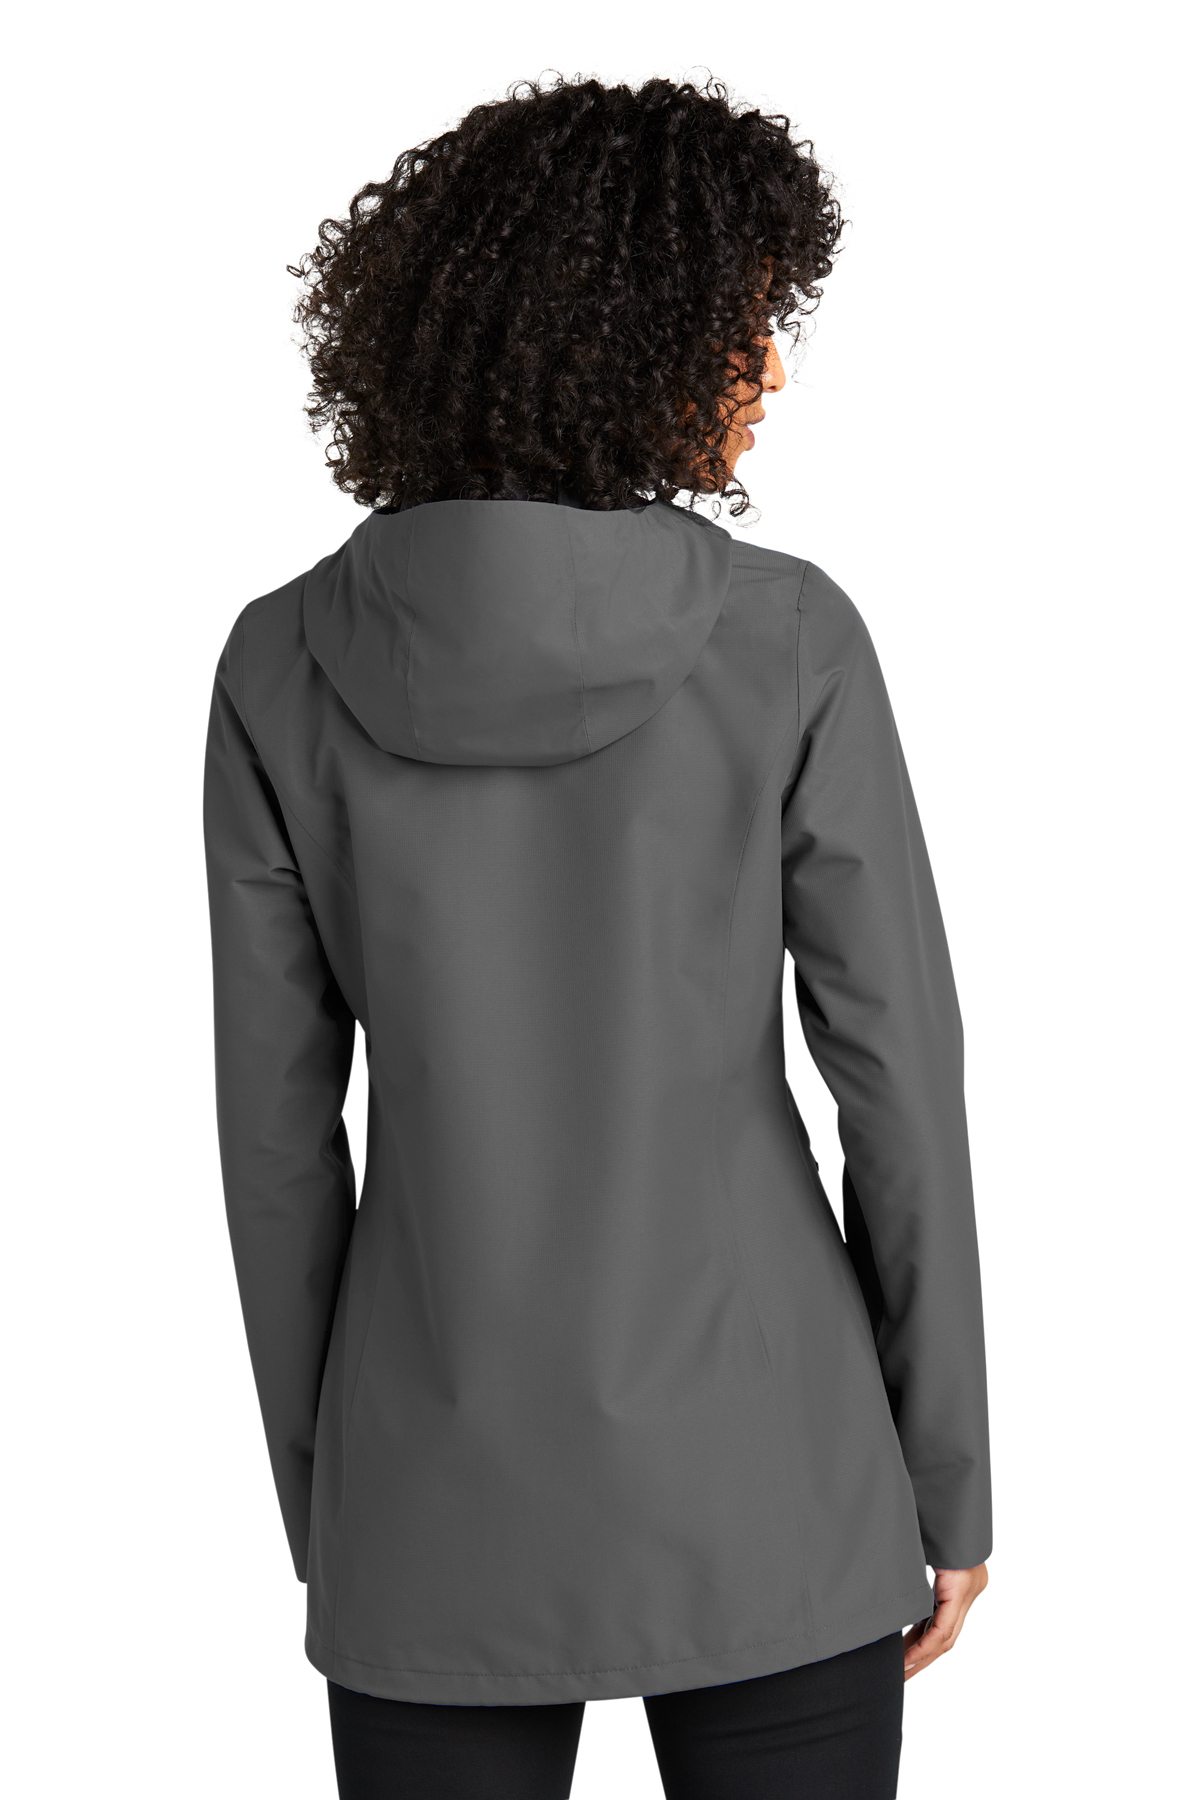 Port Authority Ladies Collective Tech Outer Shell Jacket | Product ...